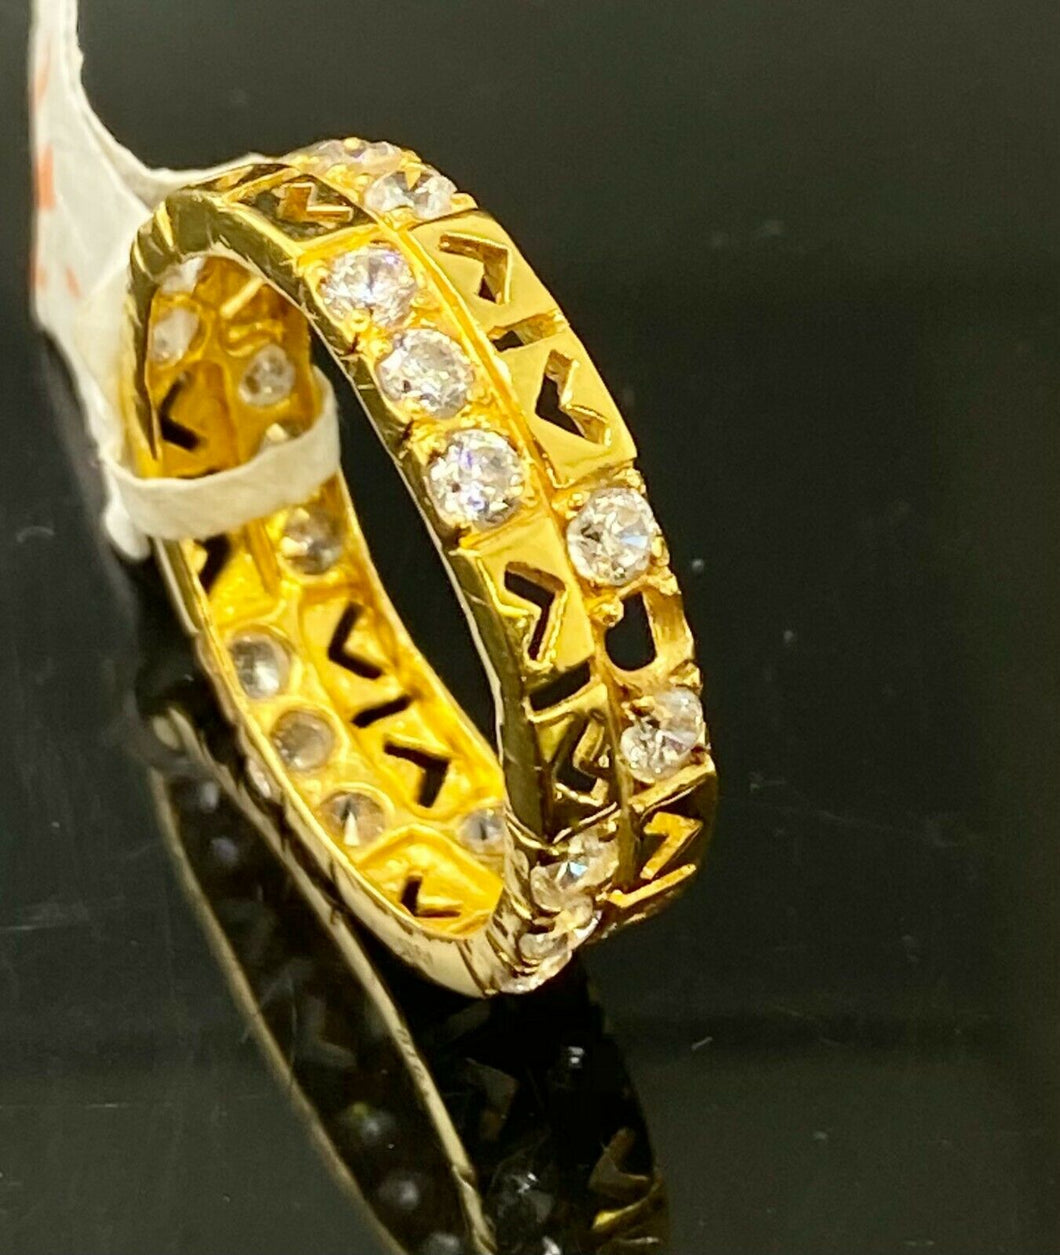 22k Ring Solid Gold Ladies Jewelry Simple Charm Pattern Band R1750 - Royal Dubai Jewellers